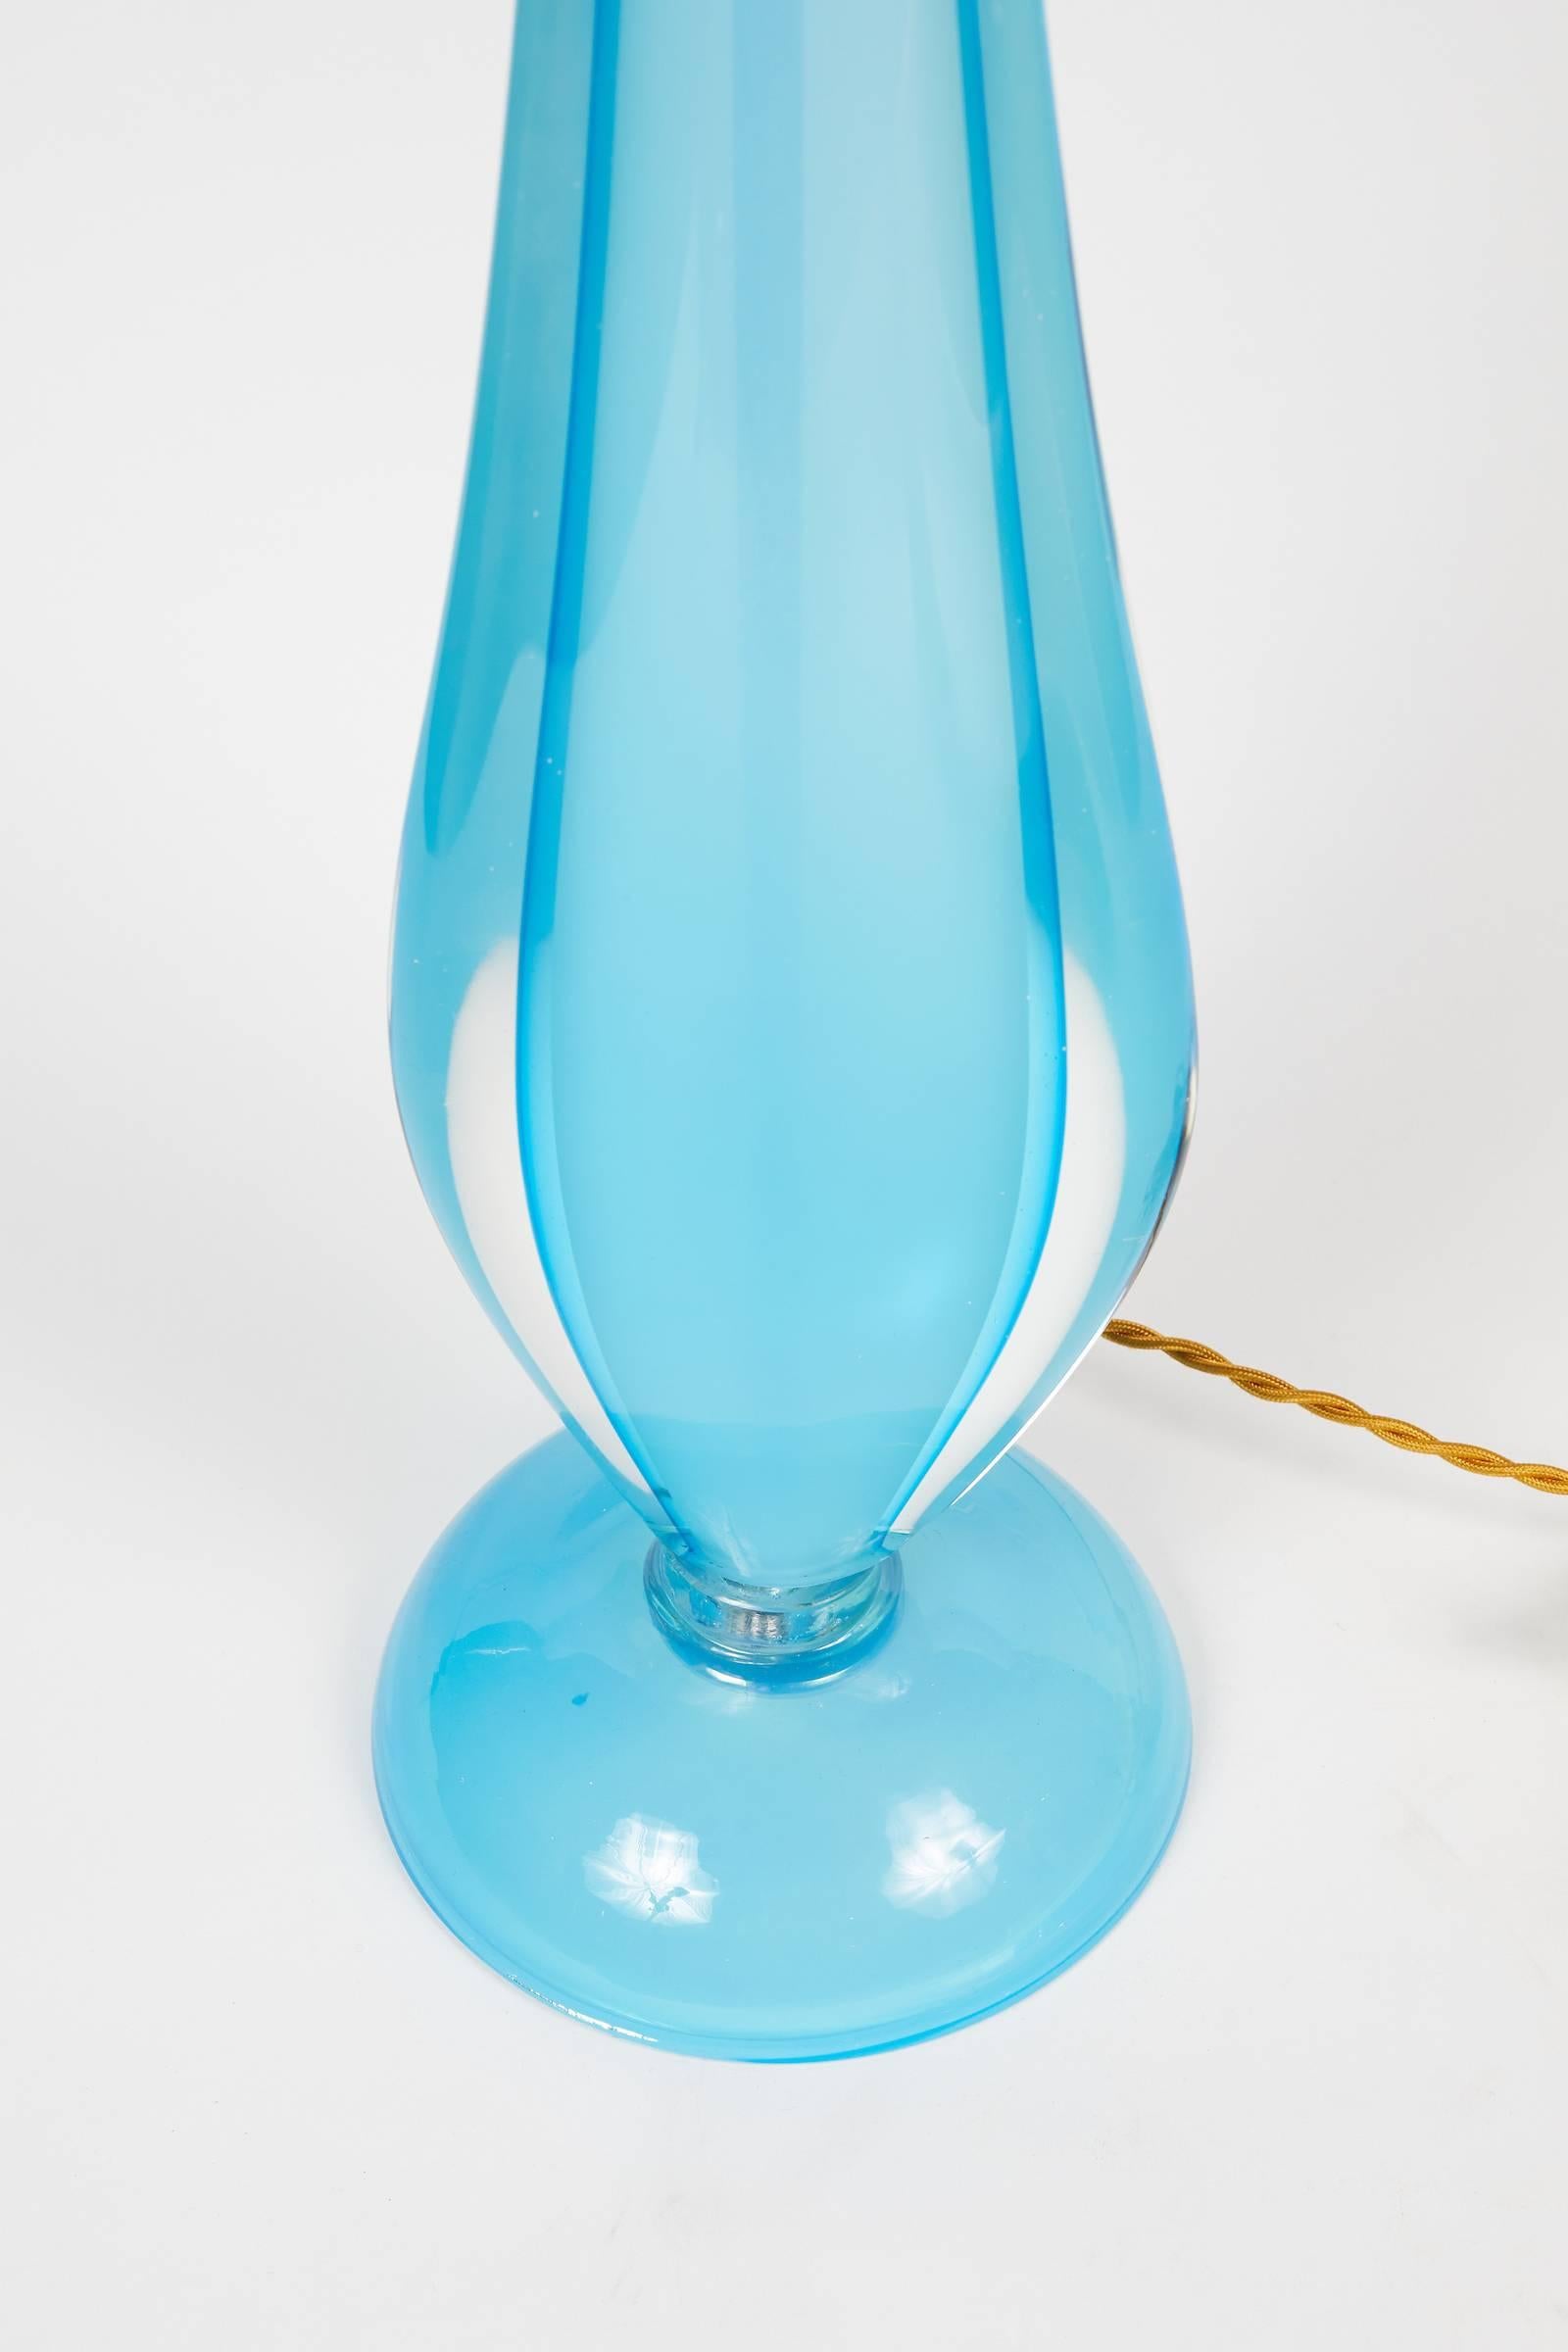 Elegant vintage elongated Italian Murano vibrant blue sommerso blown glass table lamp by Flavio Poli .
The height measurement is all the way to the top of the harp.